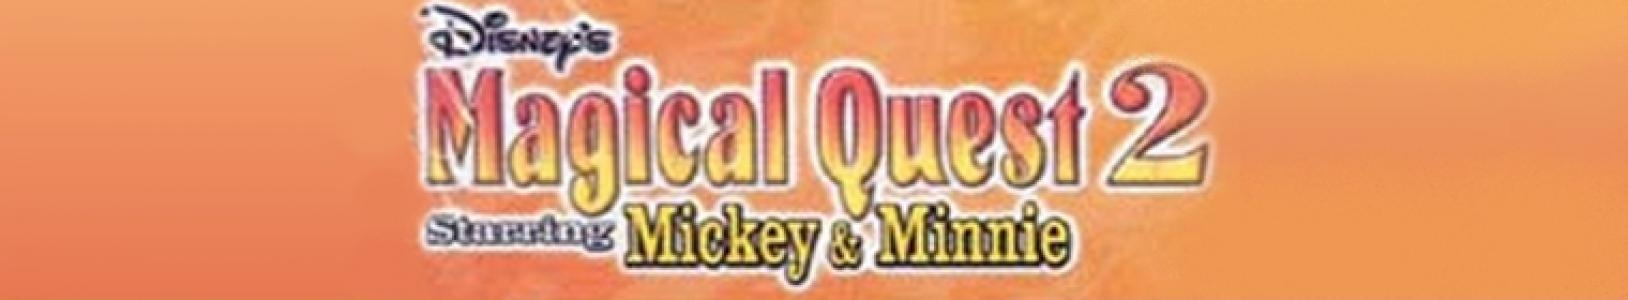 Disney's Magical Quest 2 Starring Mickey and Minnie banner